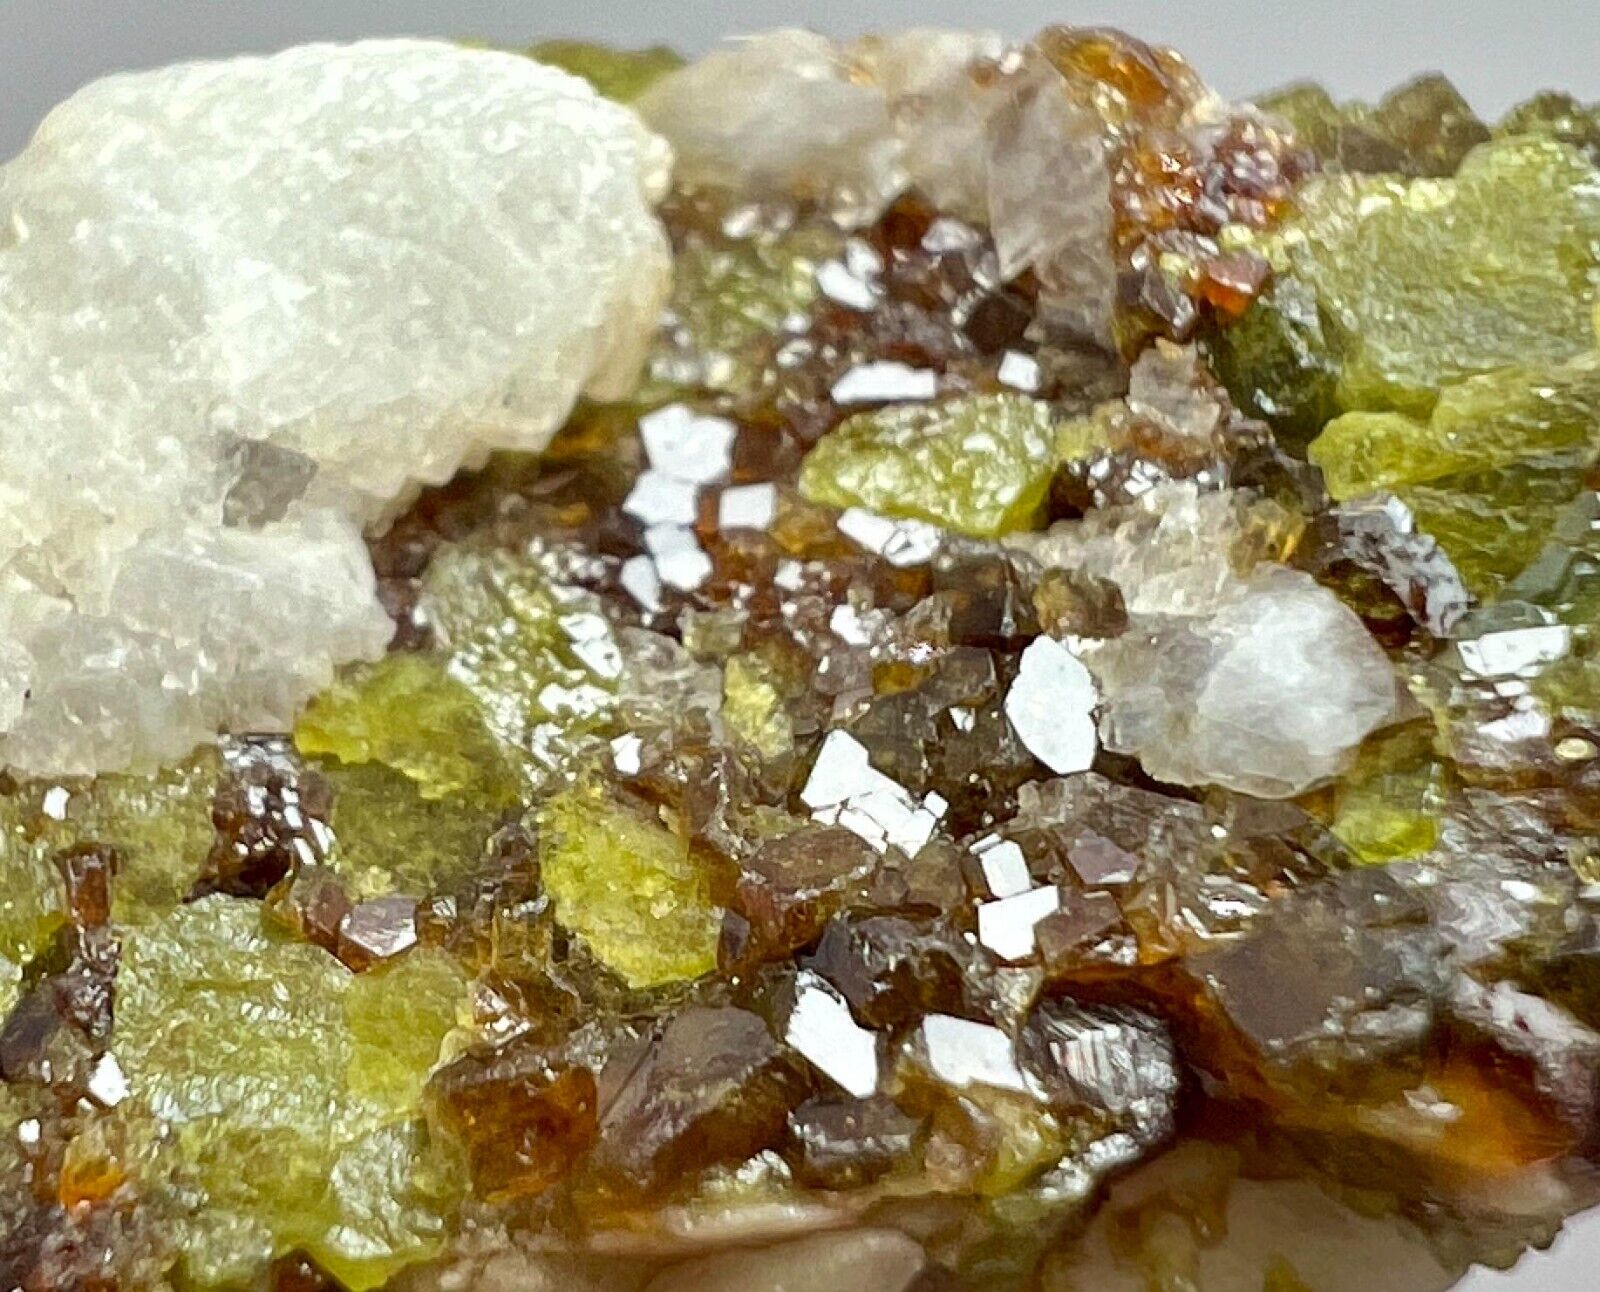 91 Ct Unusual Sphene Combined With Garnet Small Crystal Bunches On Feldspar @Pk